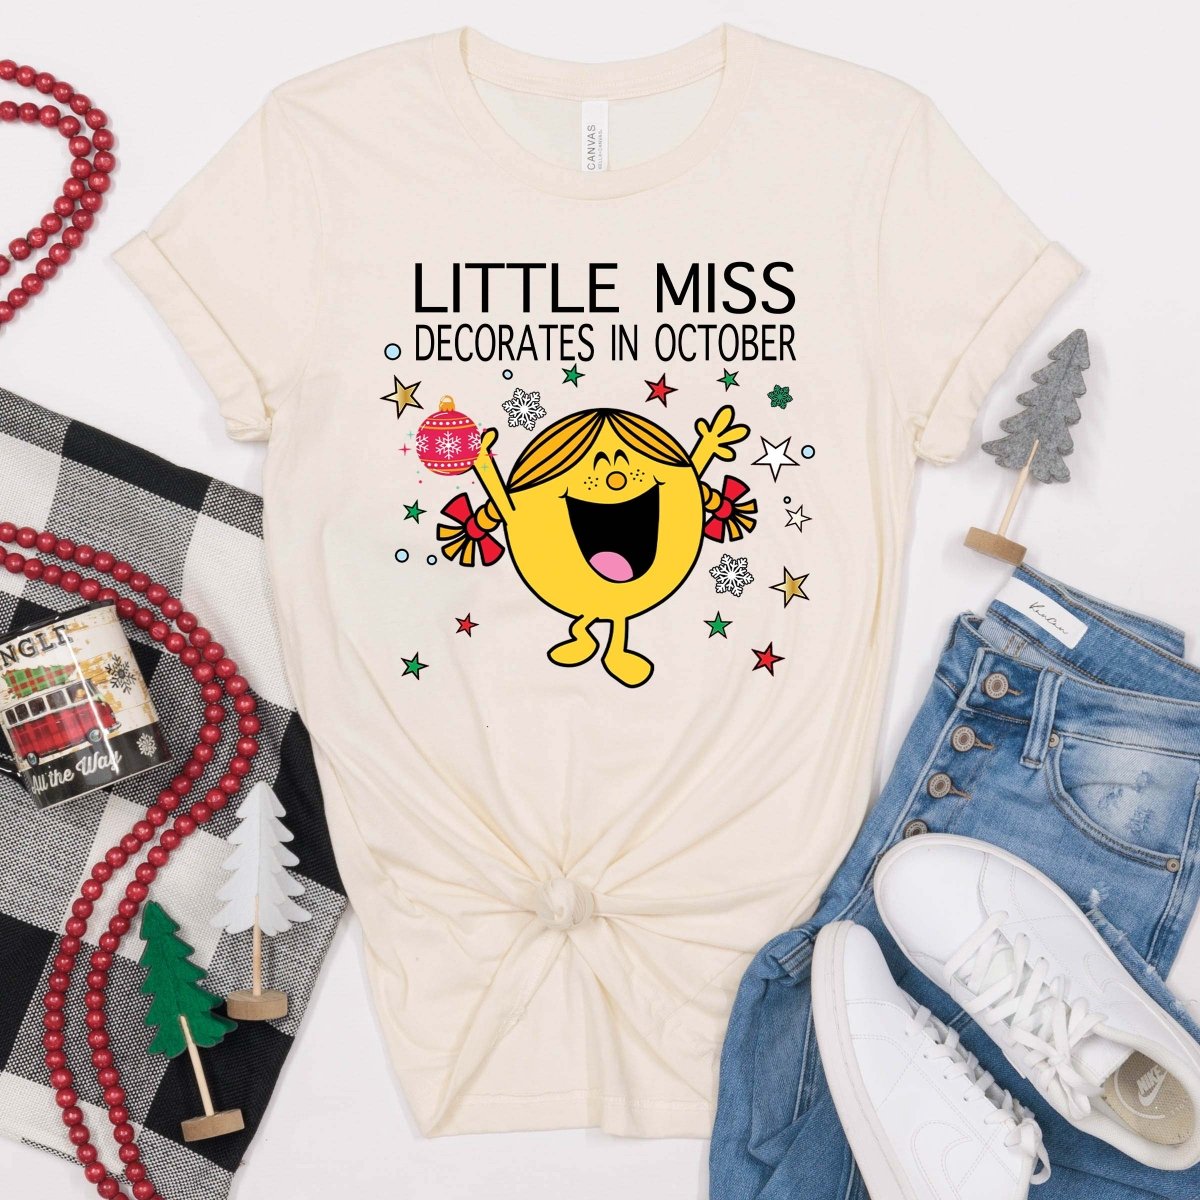 Little Miss Decorates In October Wholesale Tee Design #20 - Limeberry Designs